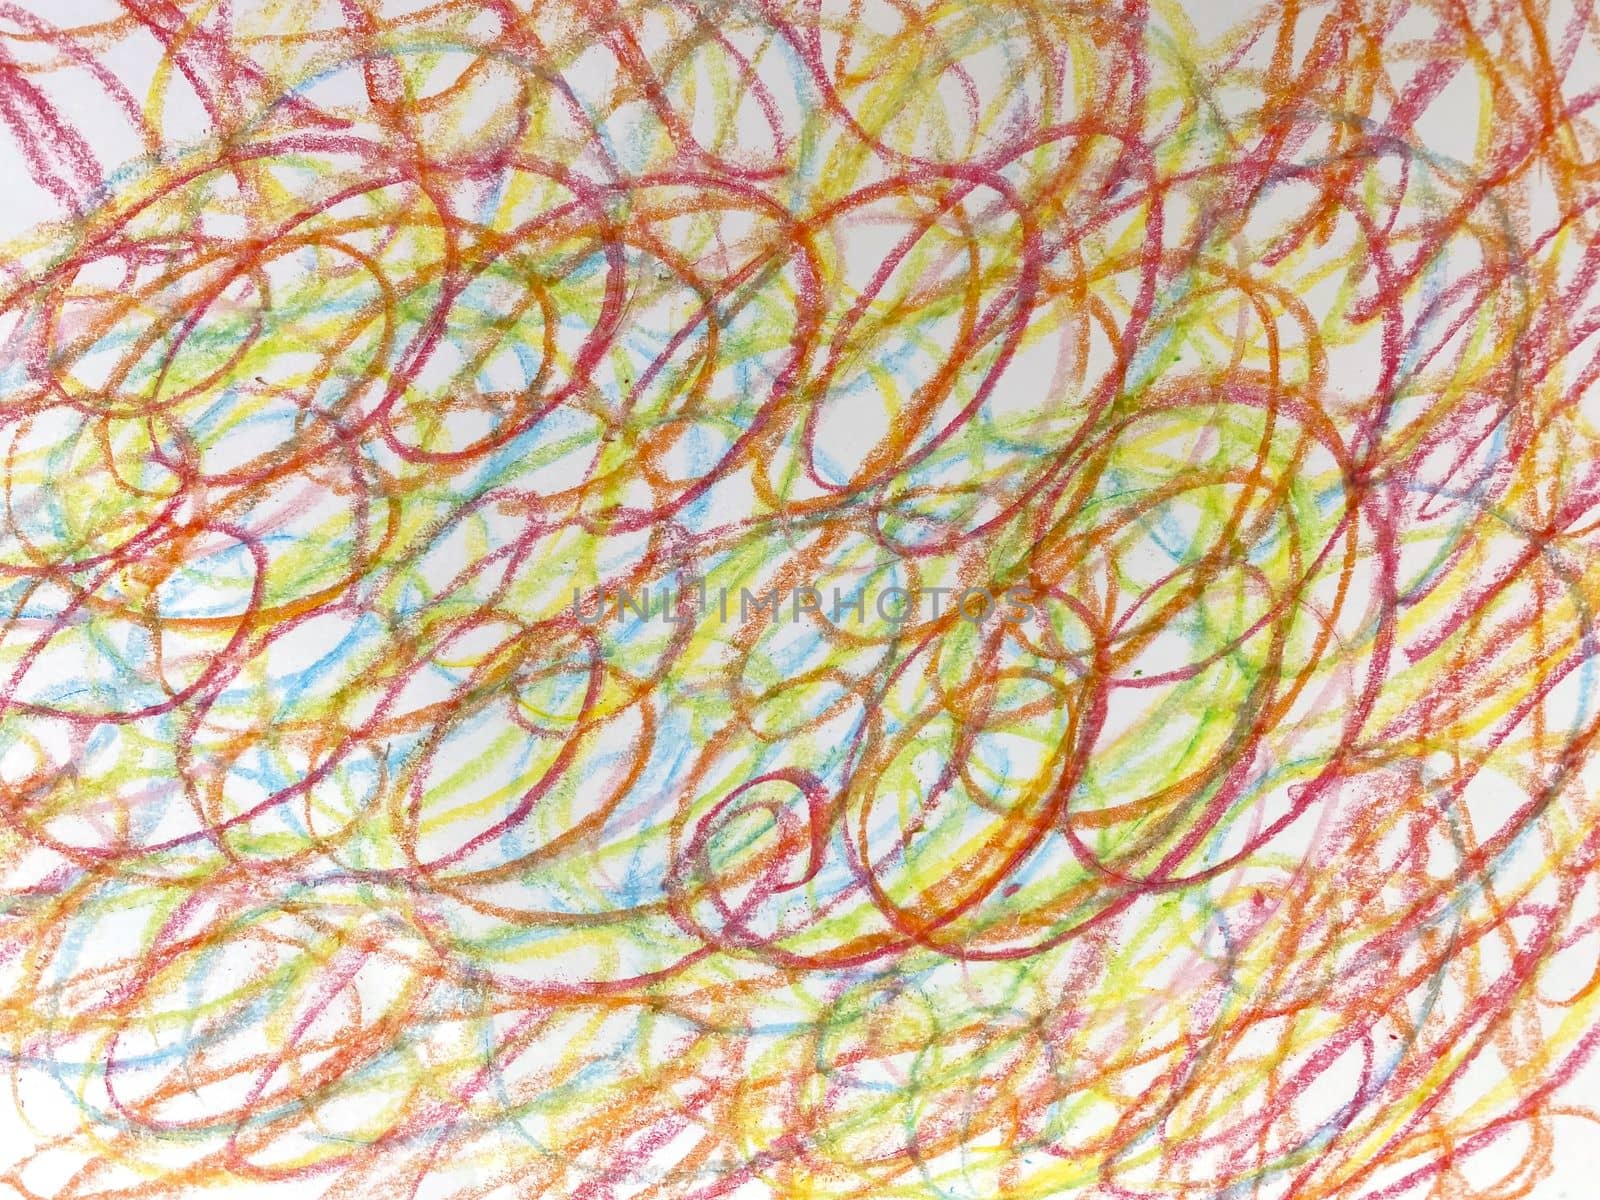 Texture, background, doodle. Children's drawings with colored crayons on white paper.